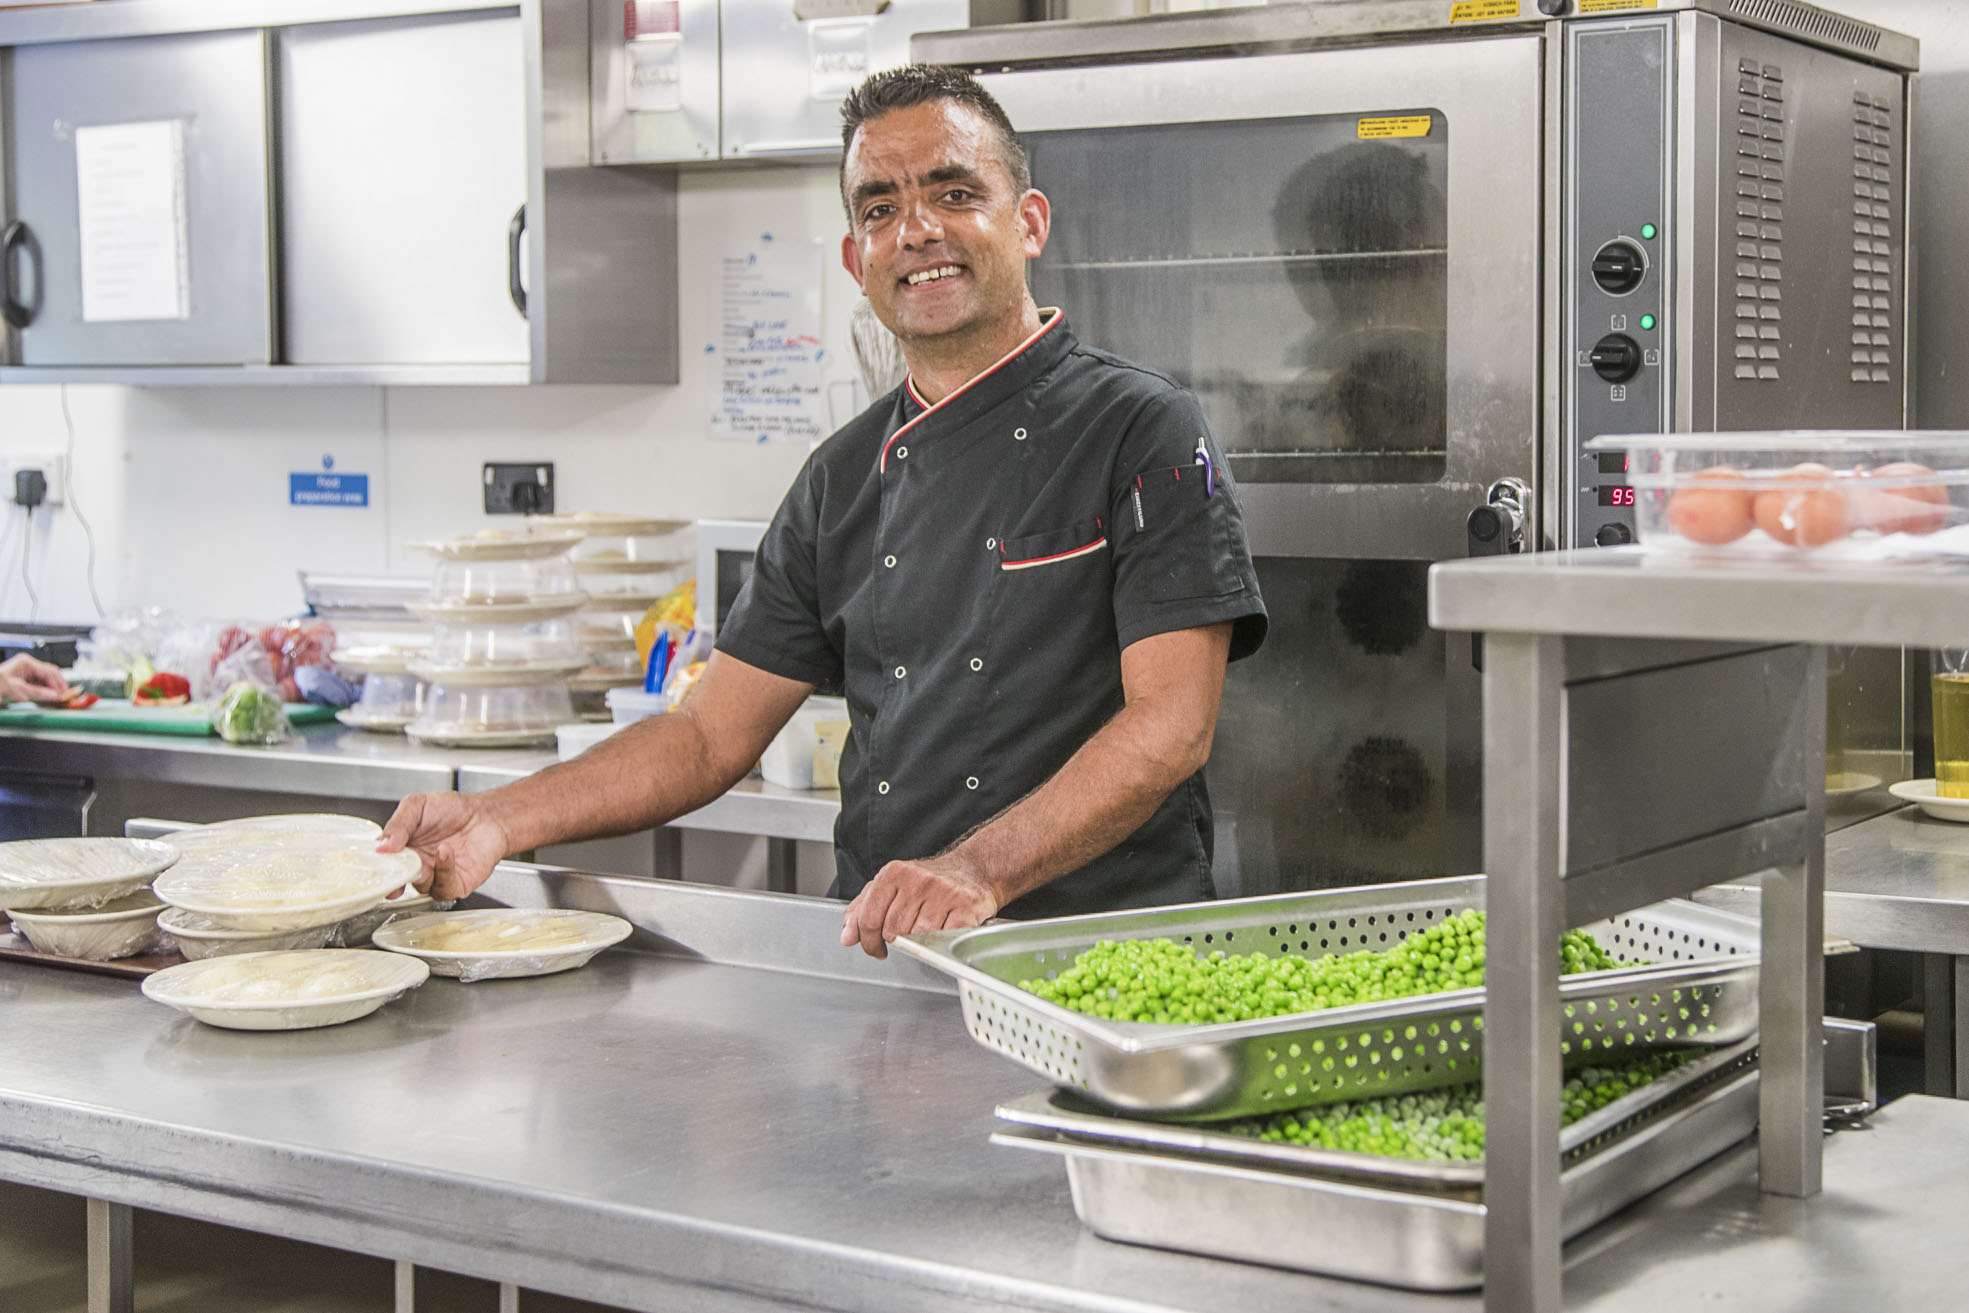 Head chef Anthony in running for award thanks to multi-cultural cuisine